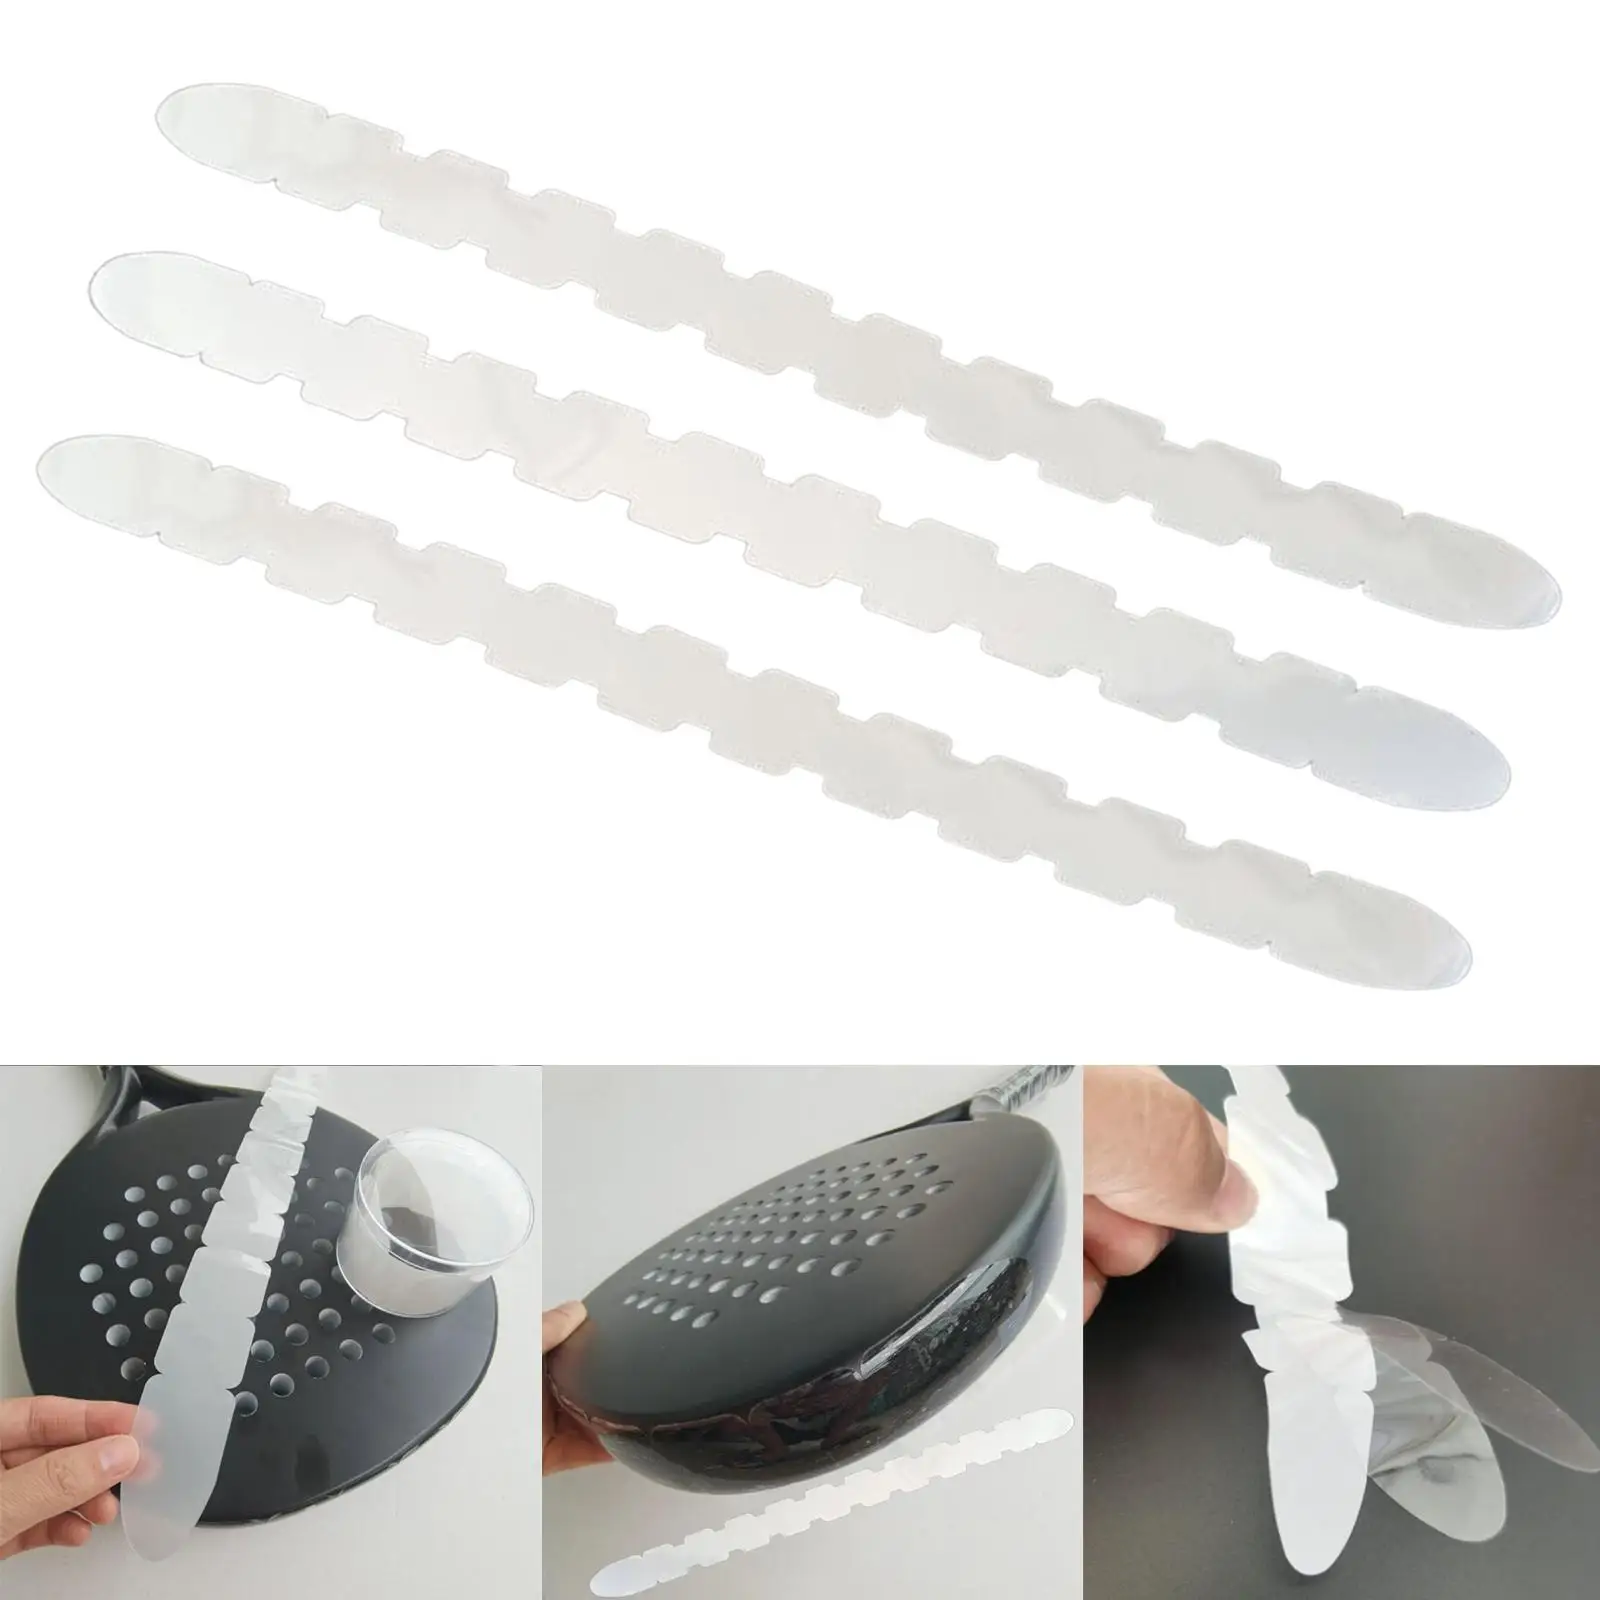 3 Pieces Tennis Racket Edge Protection Tape Clear Tennis Paddle Head Tape, 34cm x 3.6cm, Durable